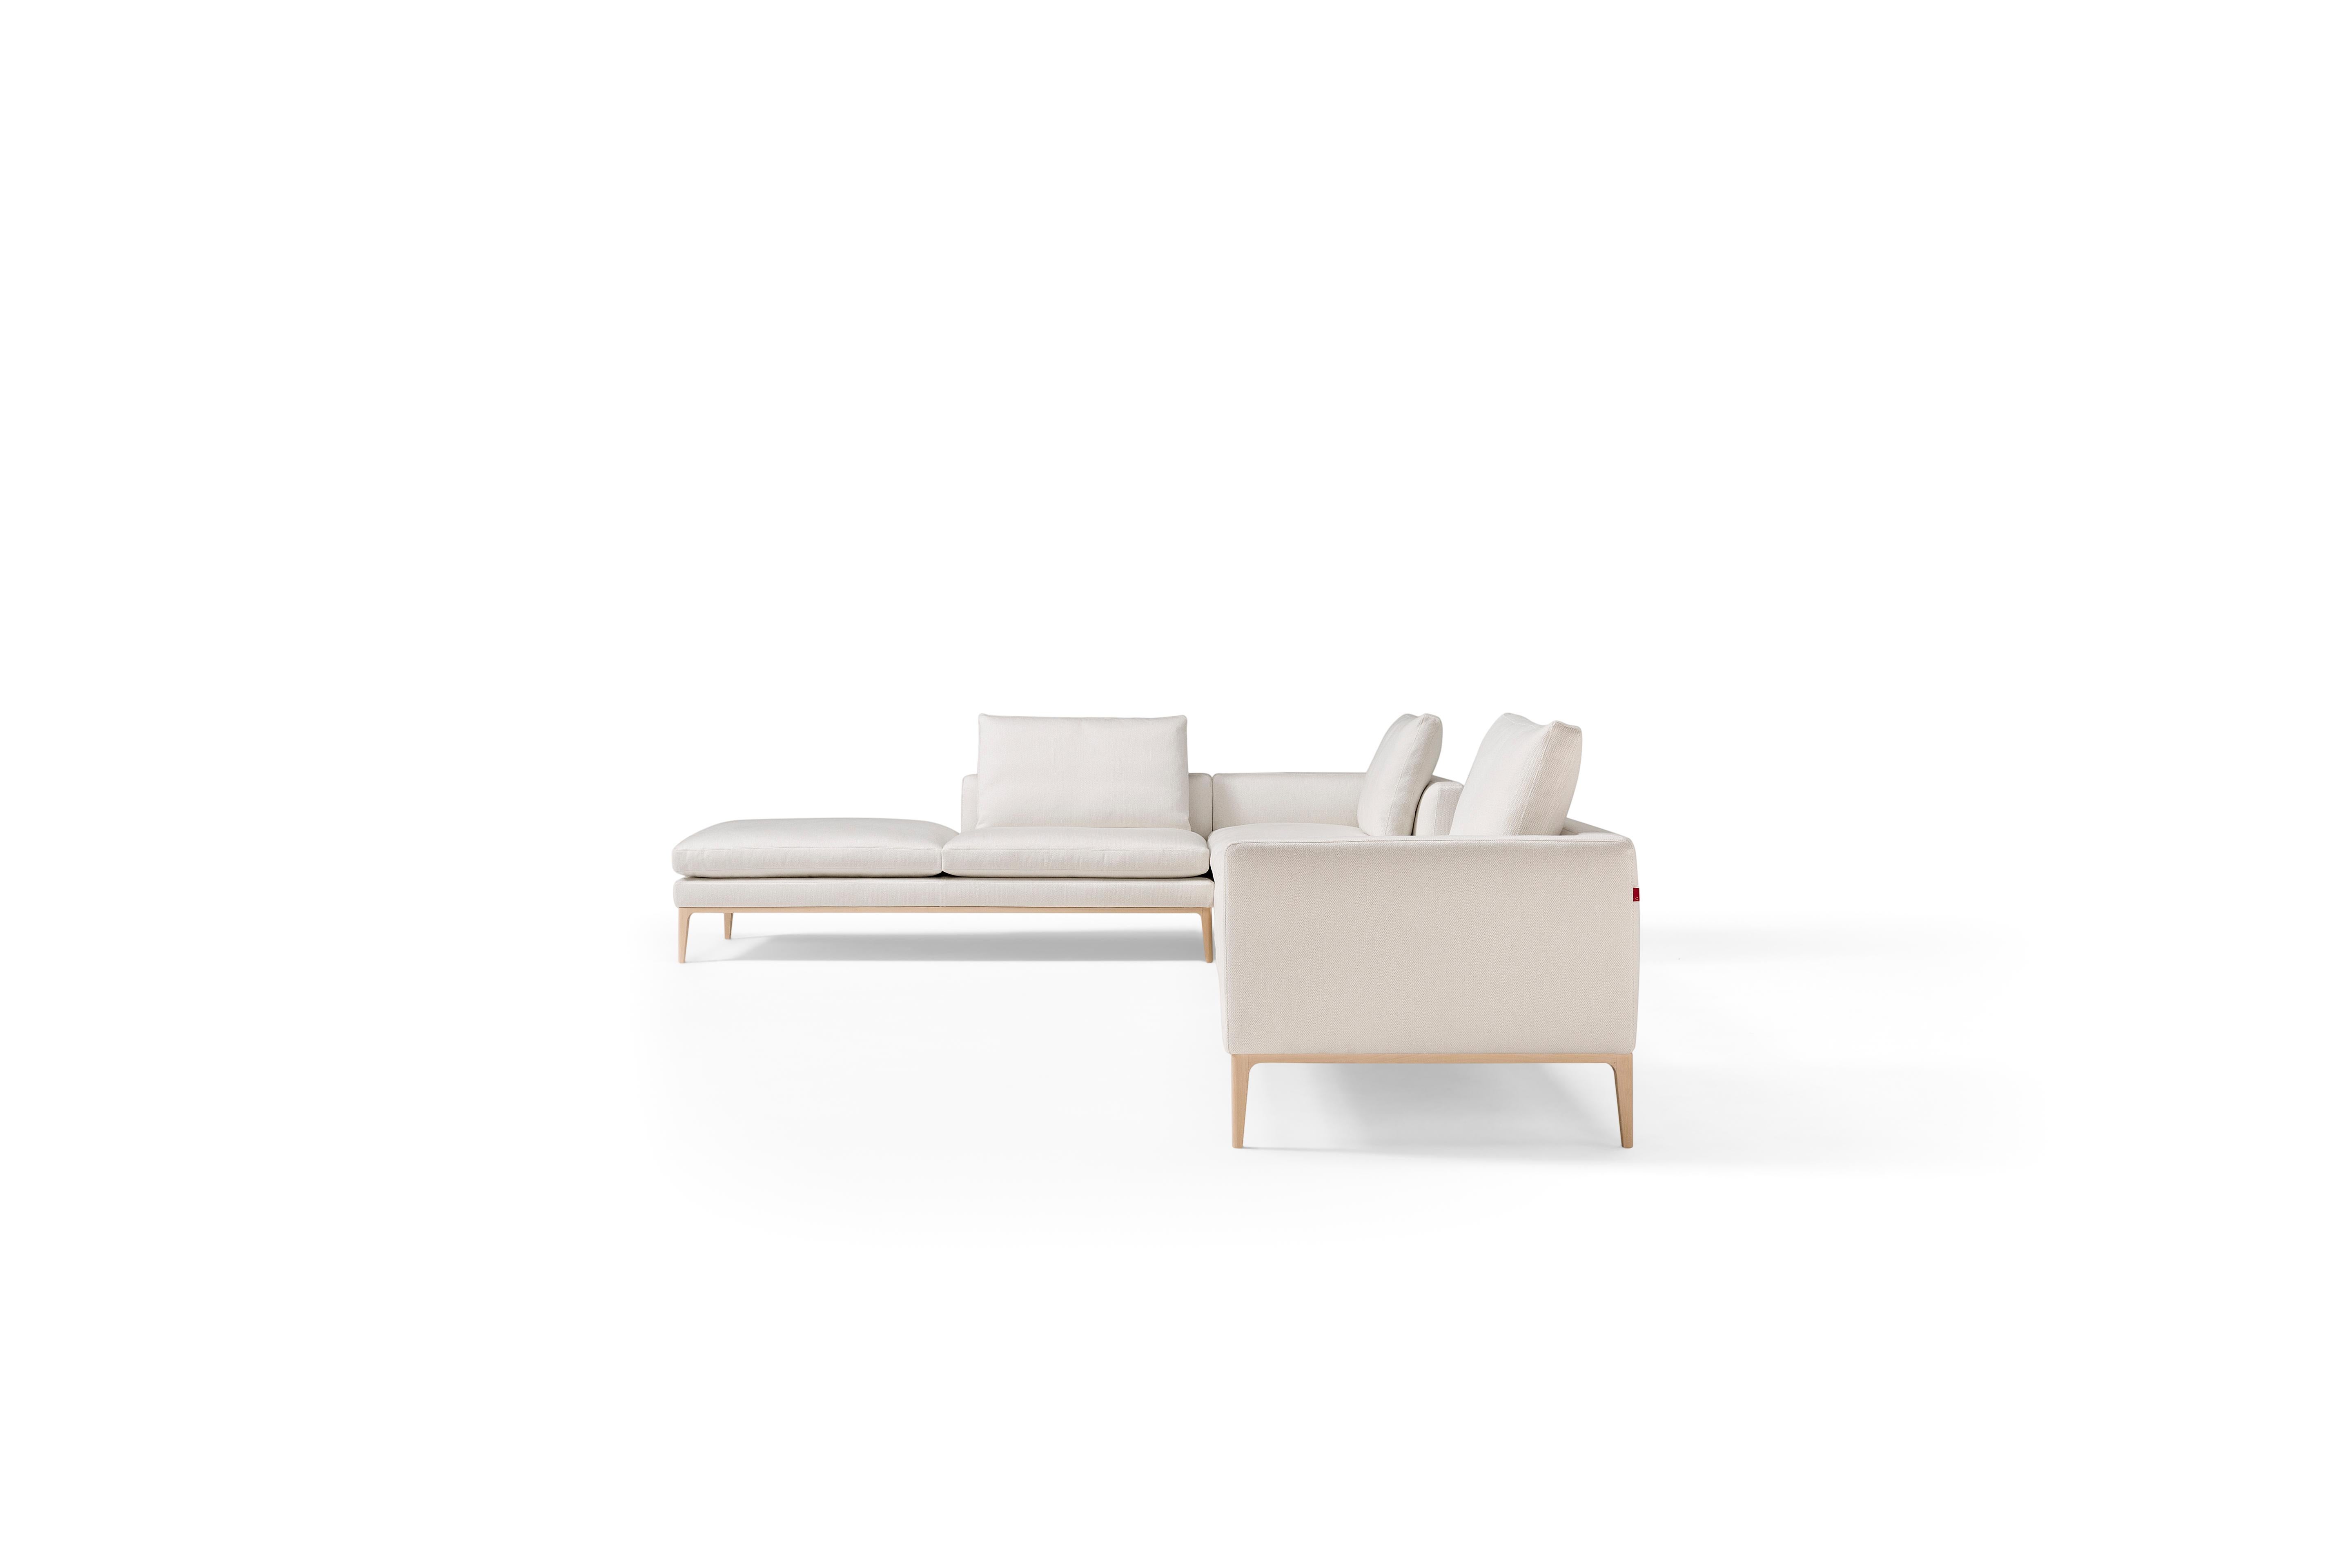 Leonard is a seating system created by the aggregation of geometric volumes defined by an elegant silhouette. A continuous line draws the outline of seats, backrests and armrests that can accommodate soft and fluffy pillows. A precise concept that